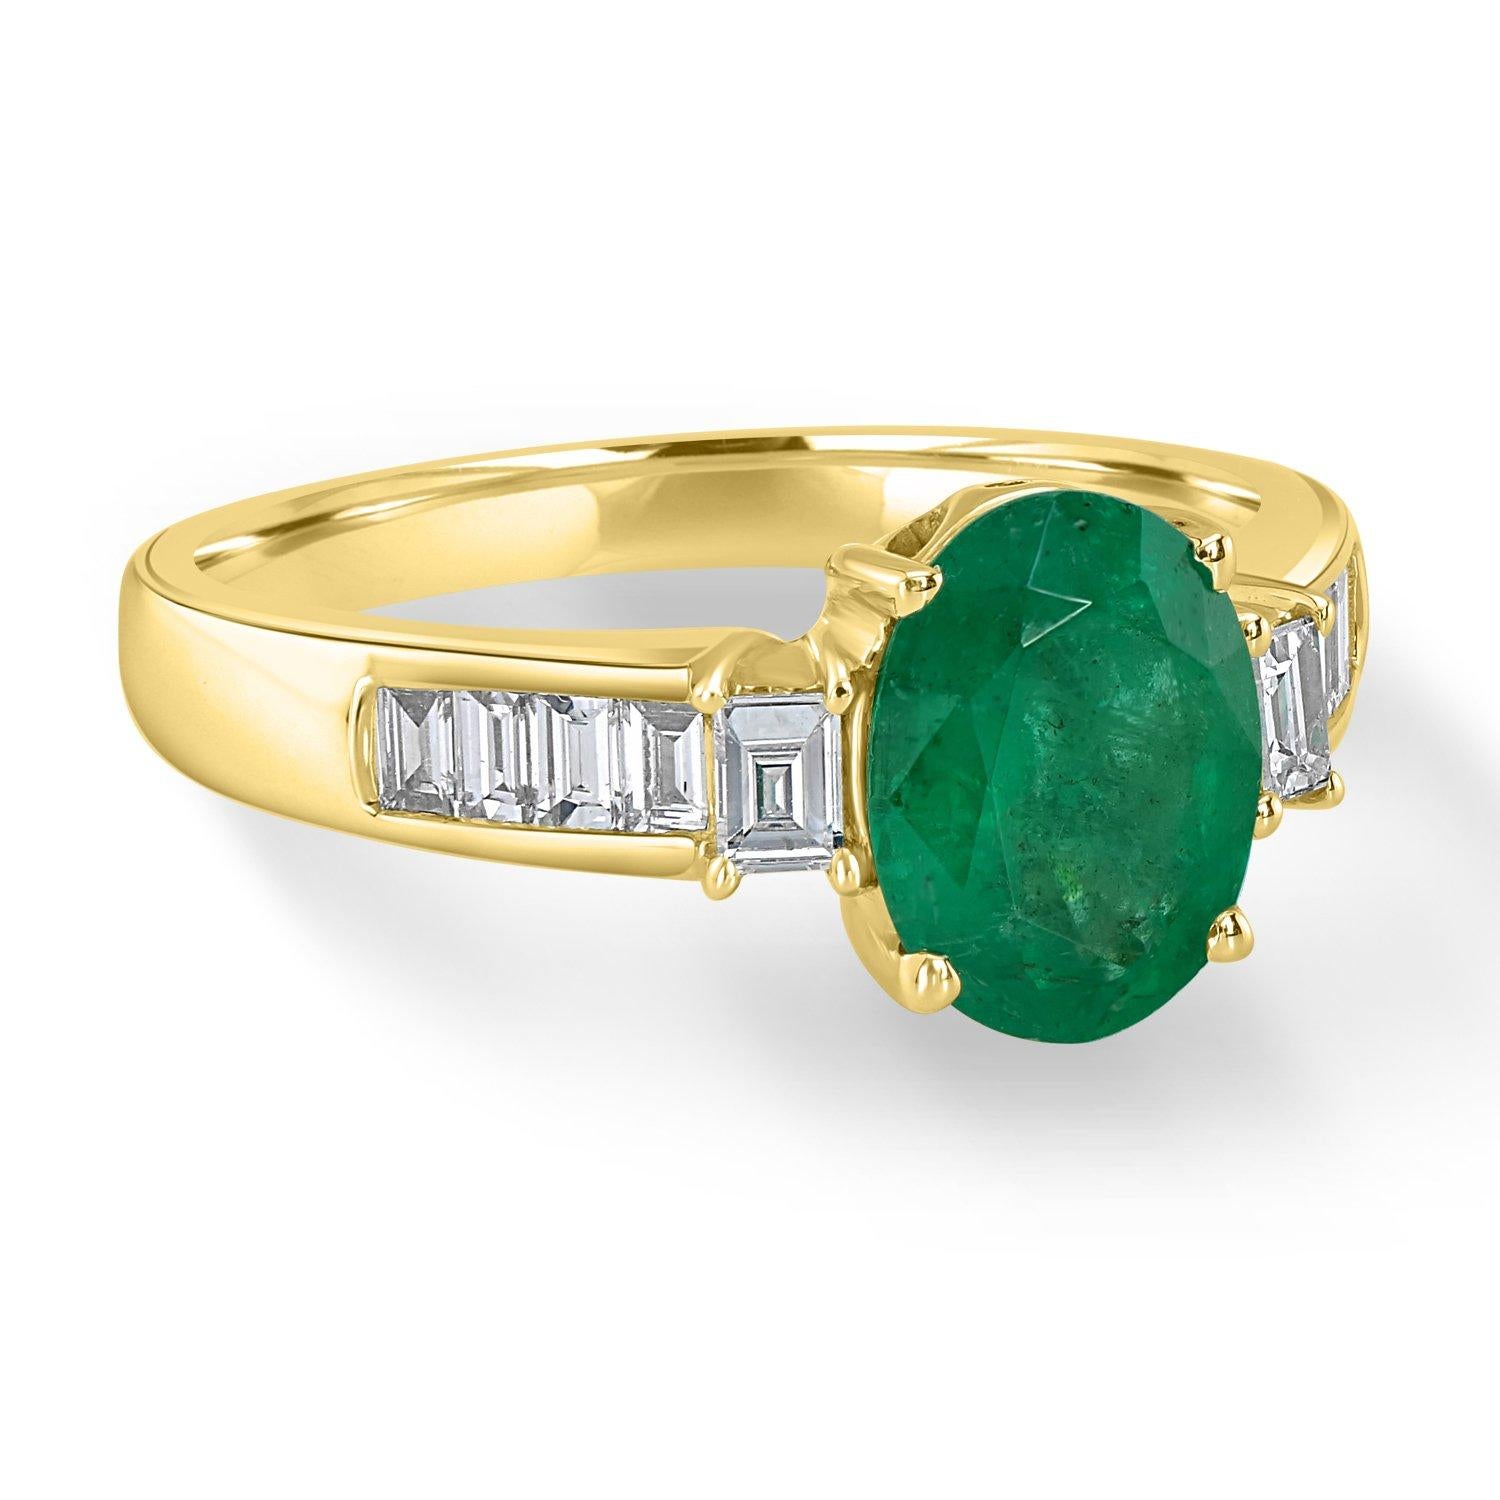 Oval Cut 1.56ct Emerald Rings with 0.41Tct Diamond Set in 14K Yellow Gold For Sale